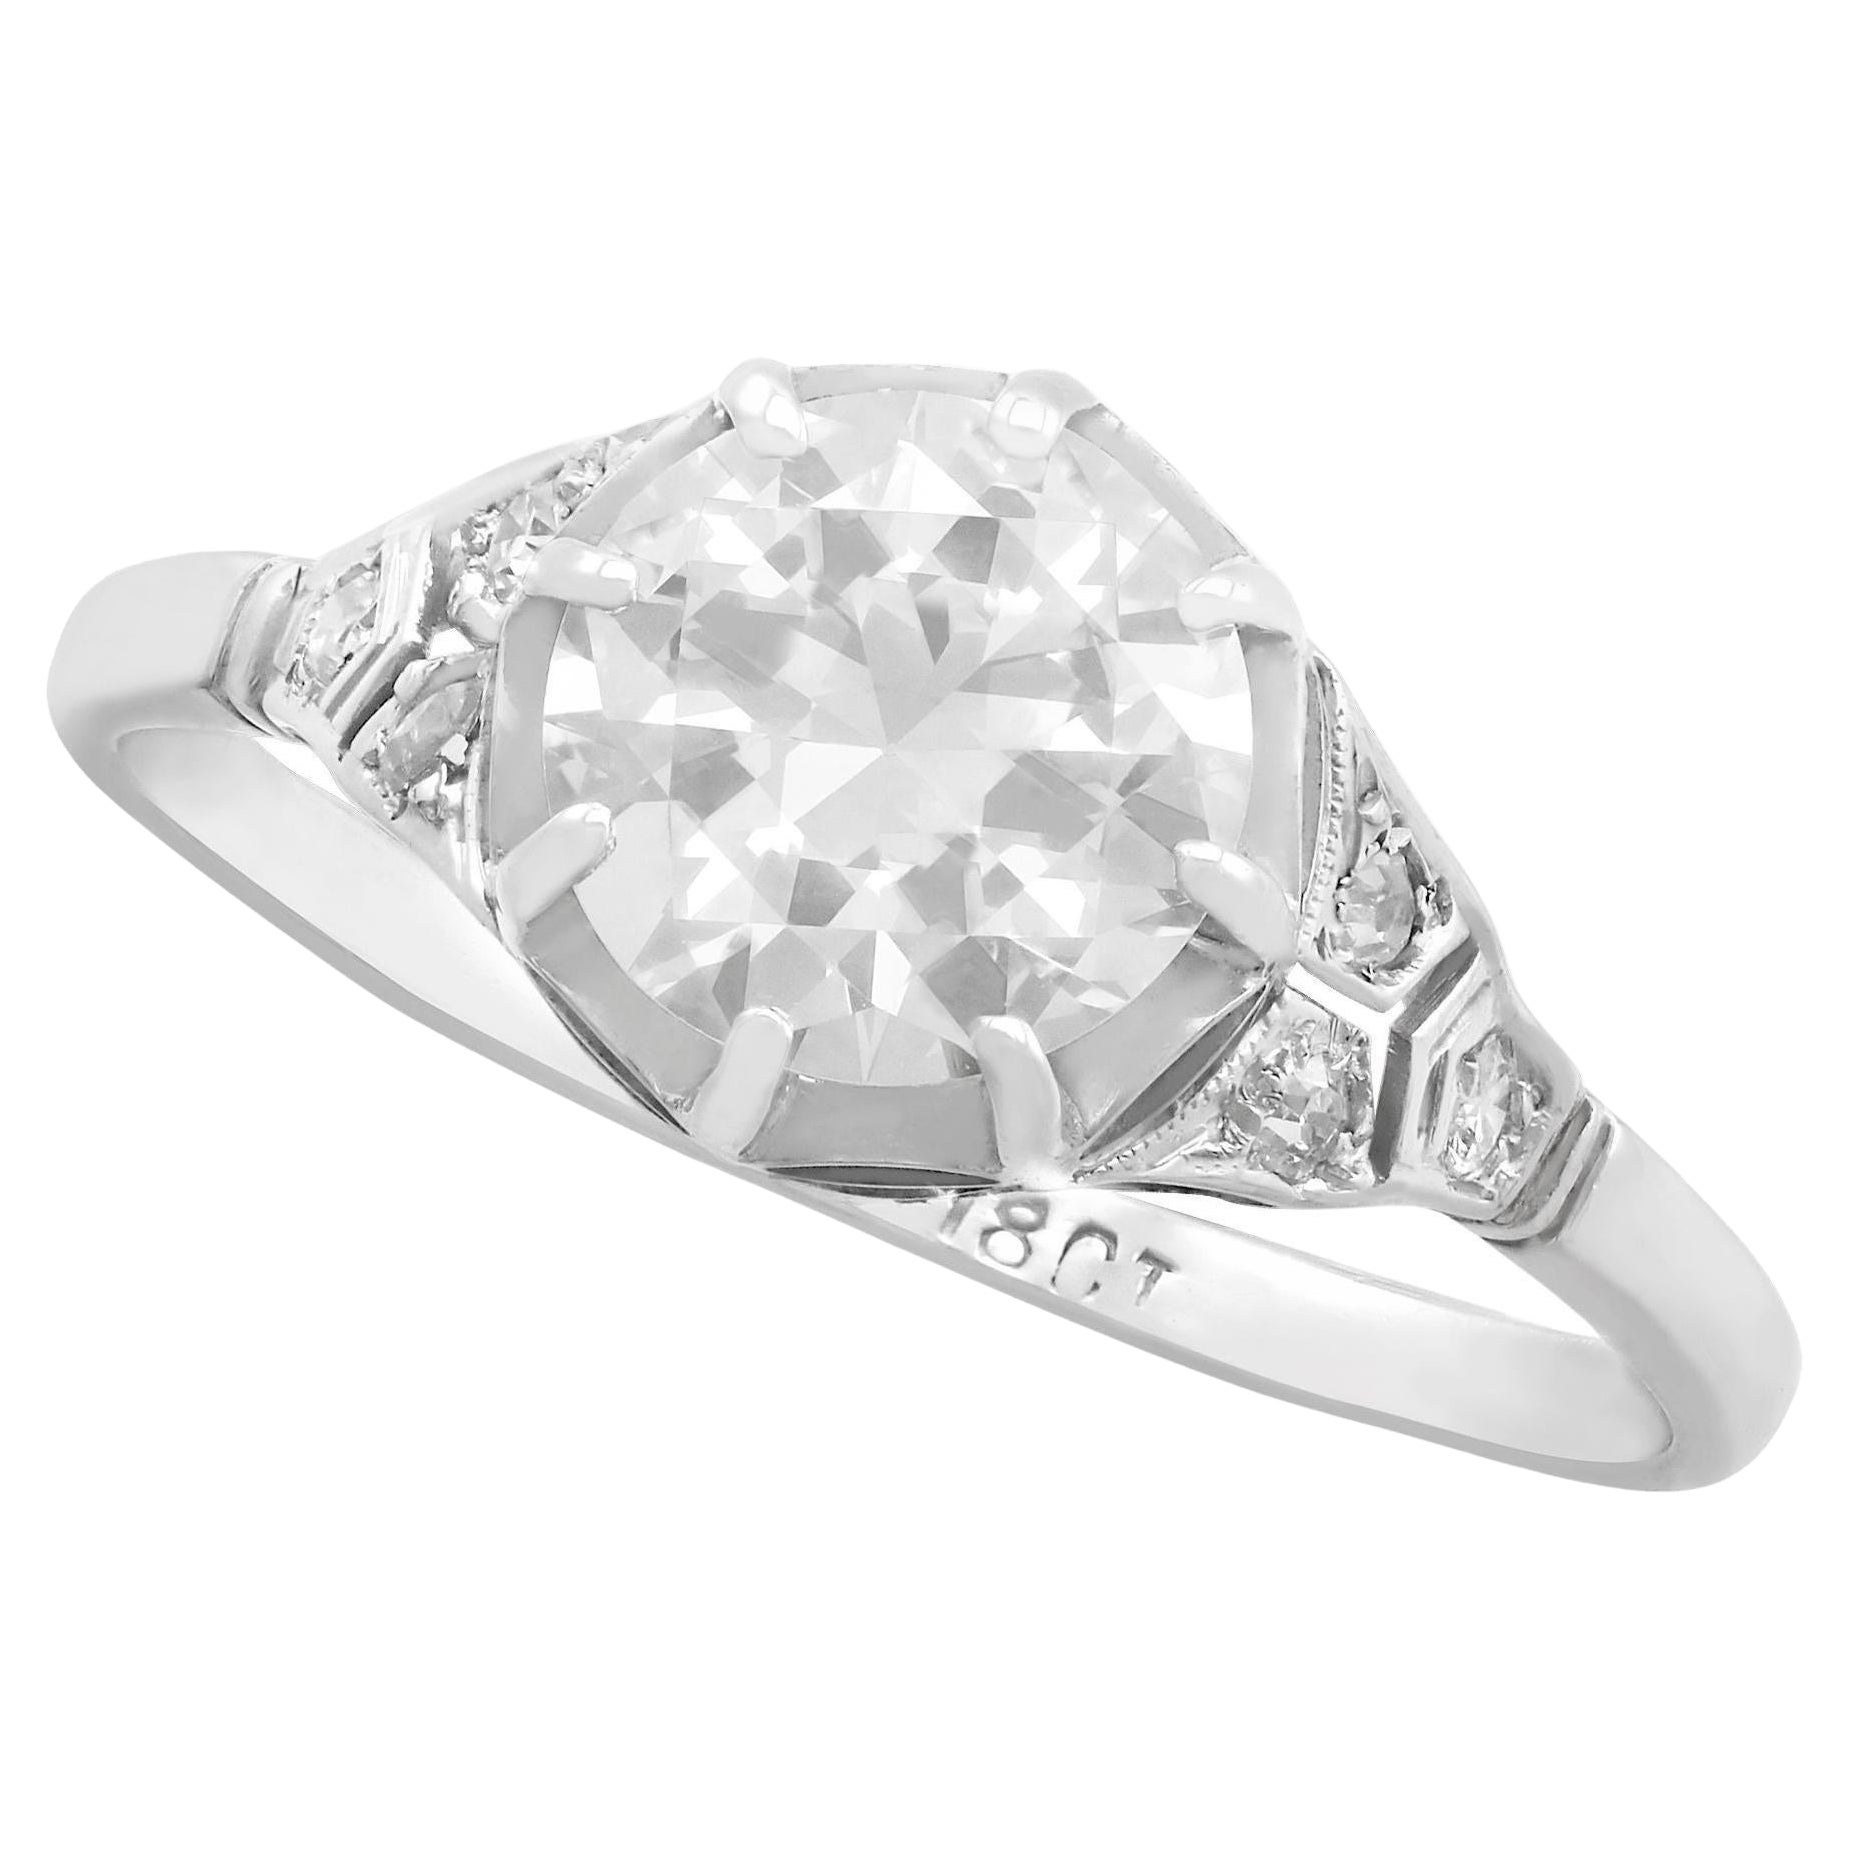 Antique 1920s 1.60 Carat Diamond and White Gold Solitaire Ring